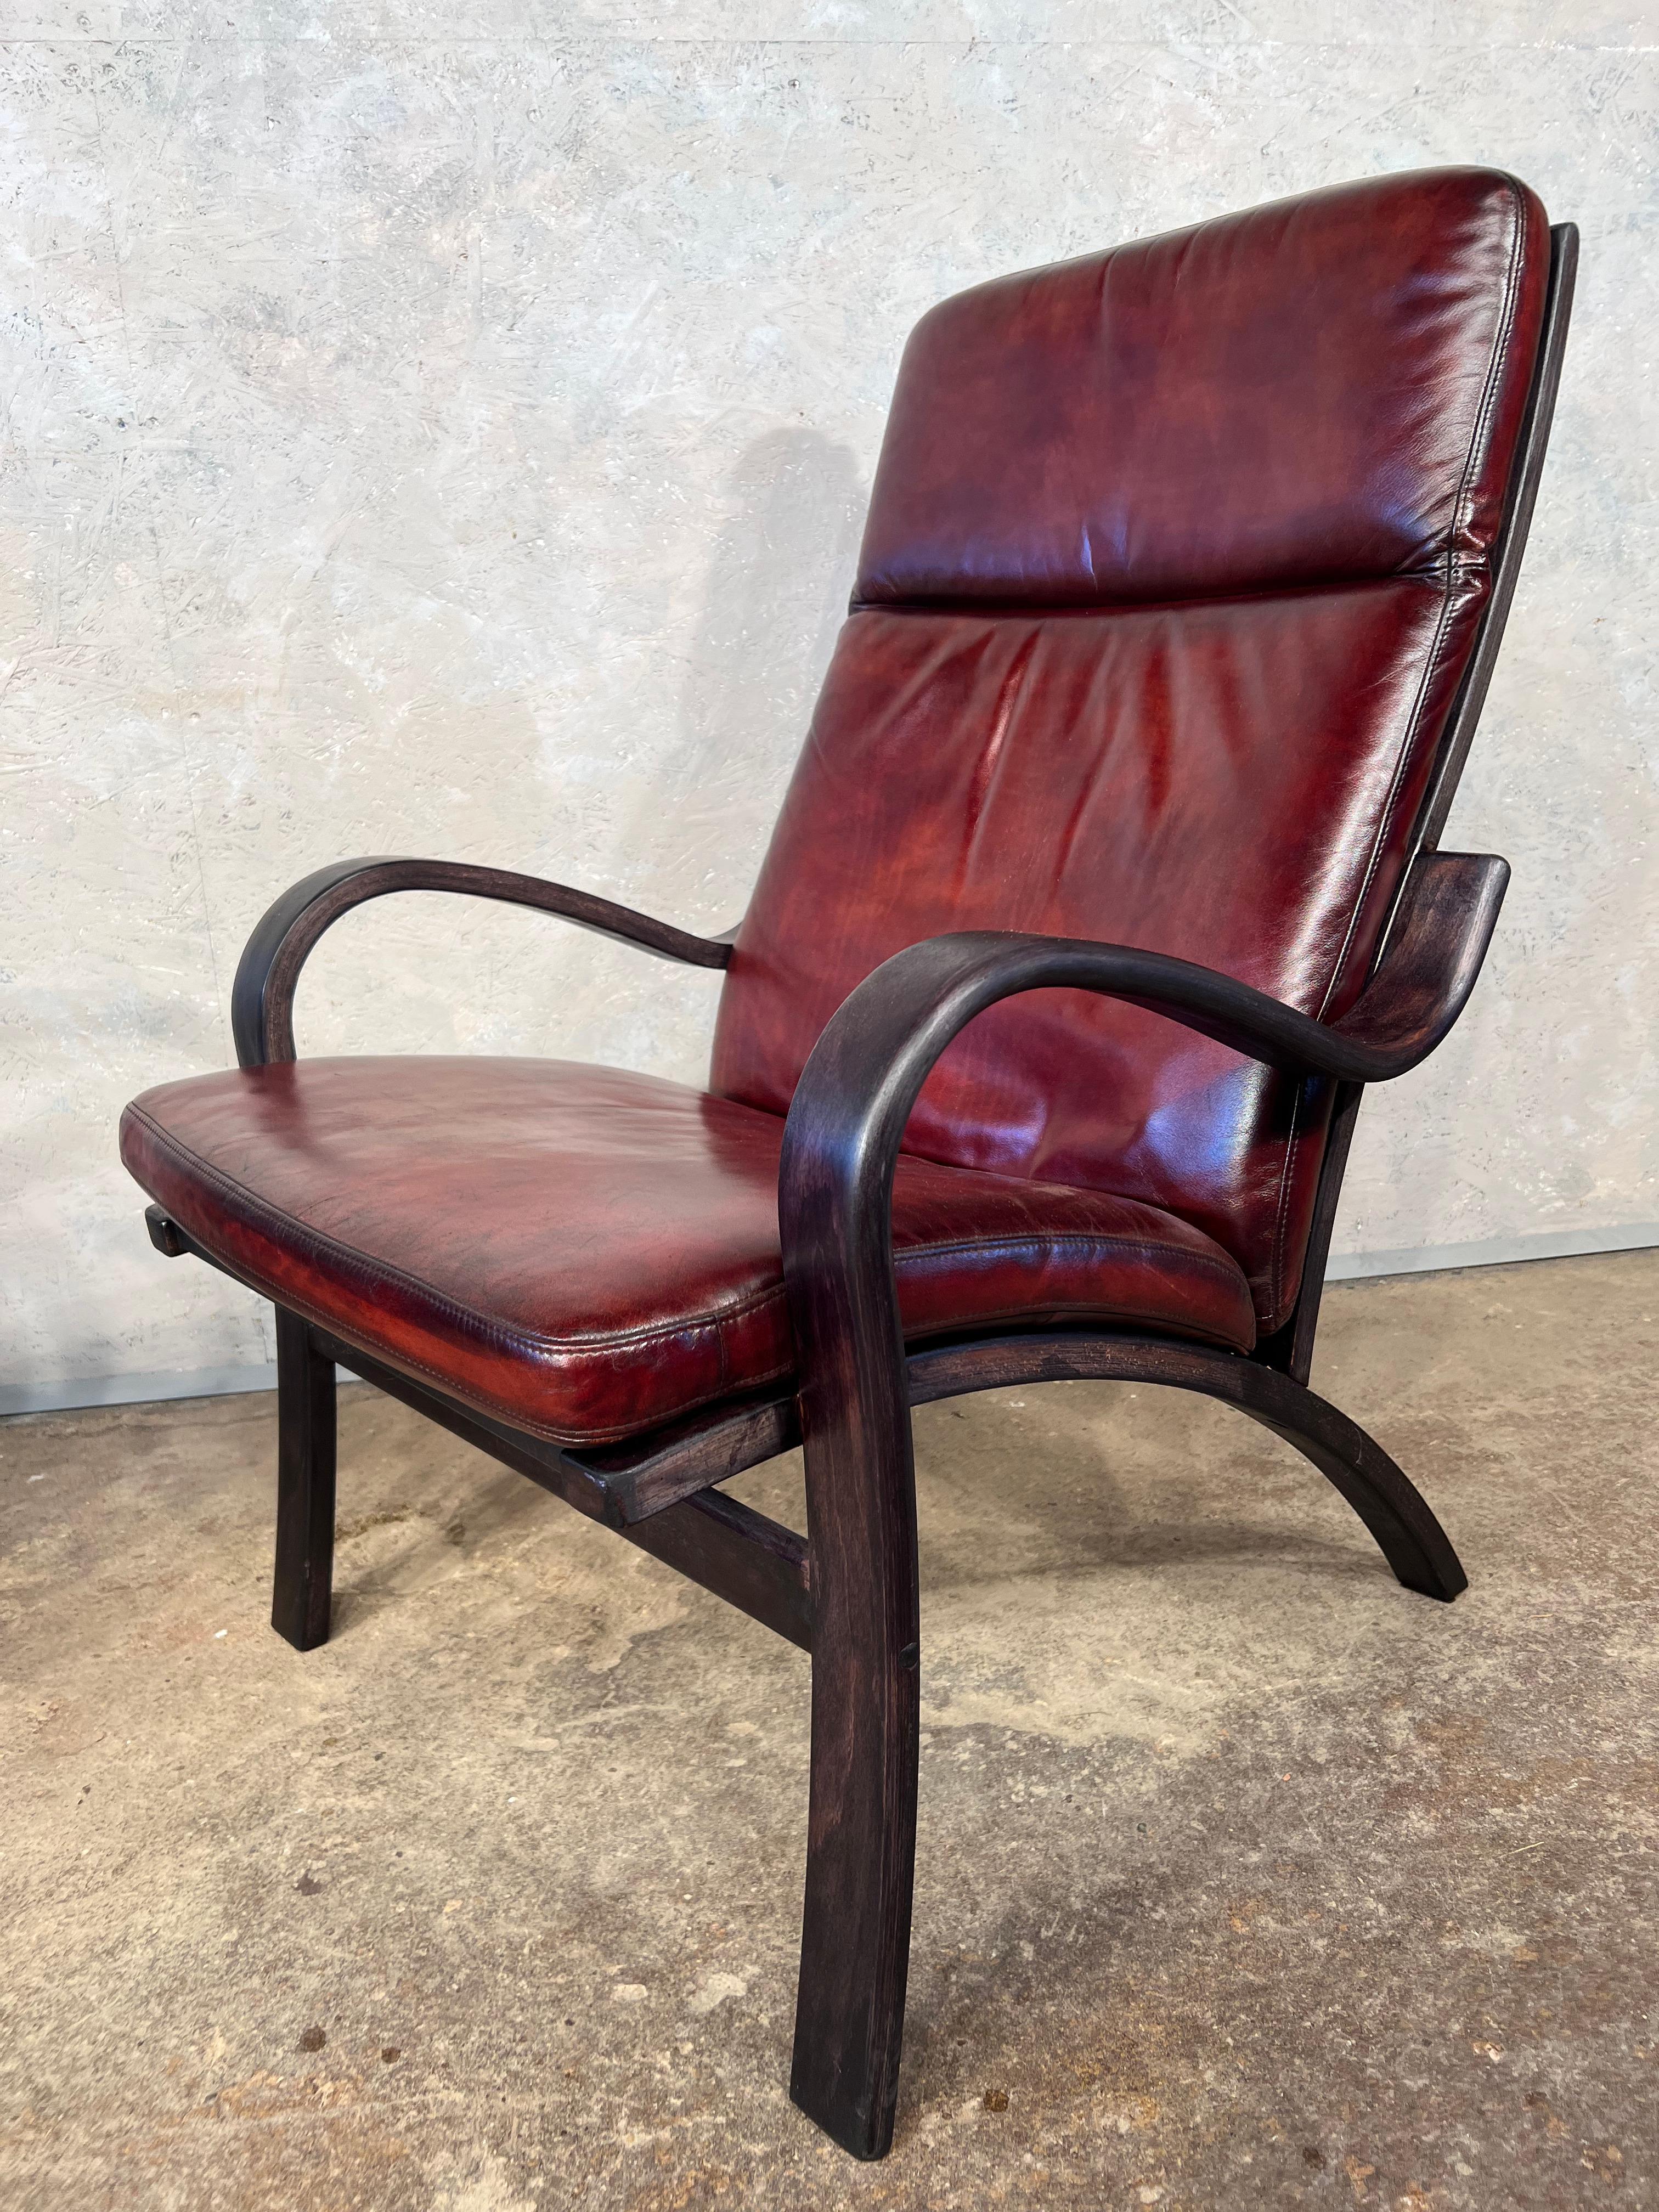 20th Century Stunning Pair of Vintage Danish Bentwood Leather Chairs 70s Retro #418 For Sale